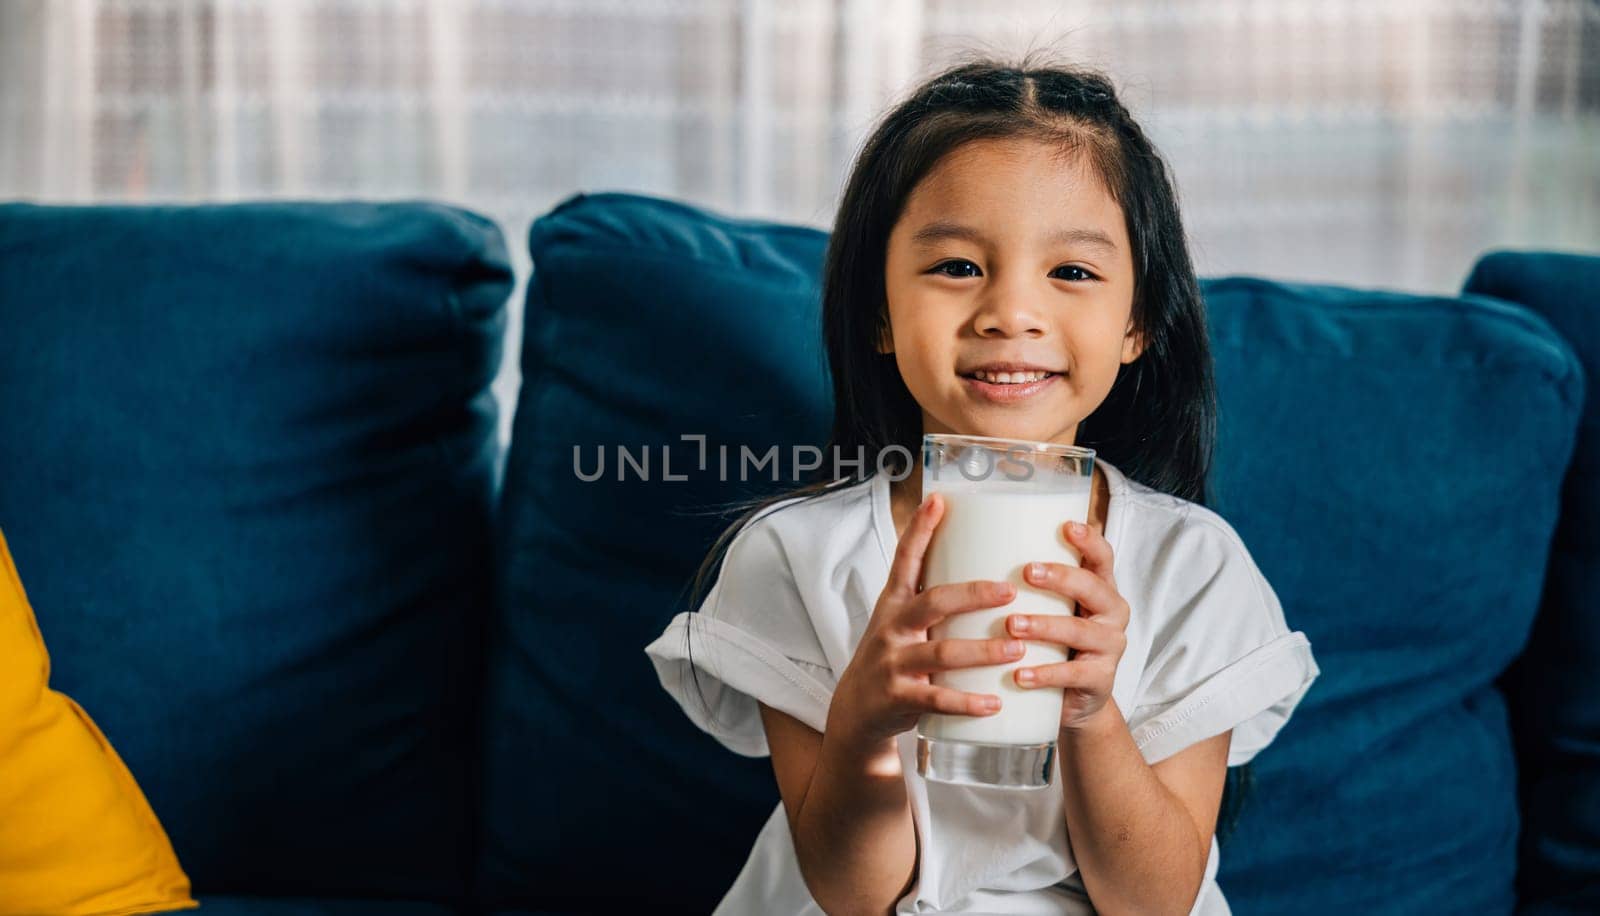 Asian child enjoys a glass of milk on the sofa their happiness and innocence shining through by Sorapop